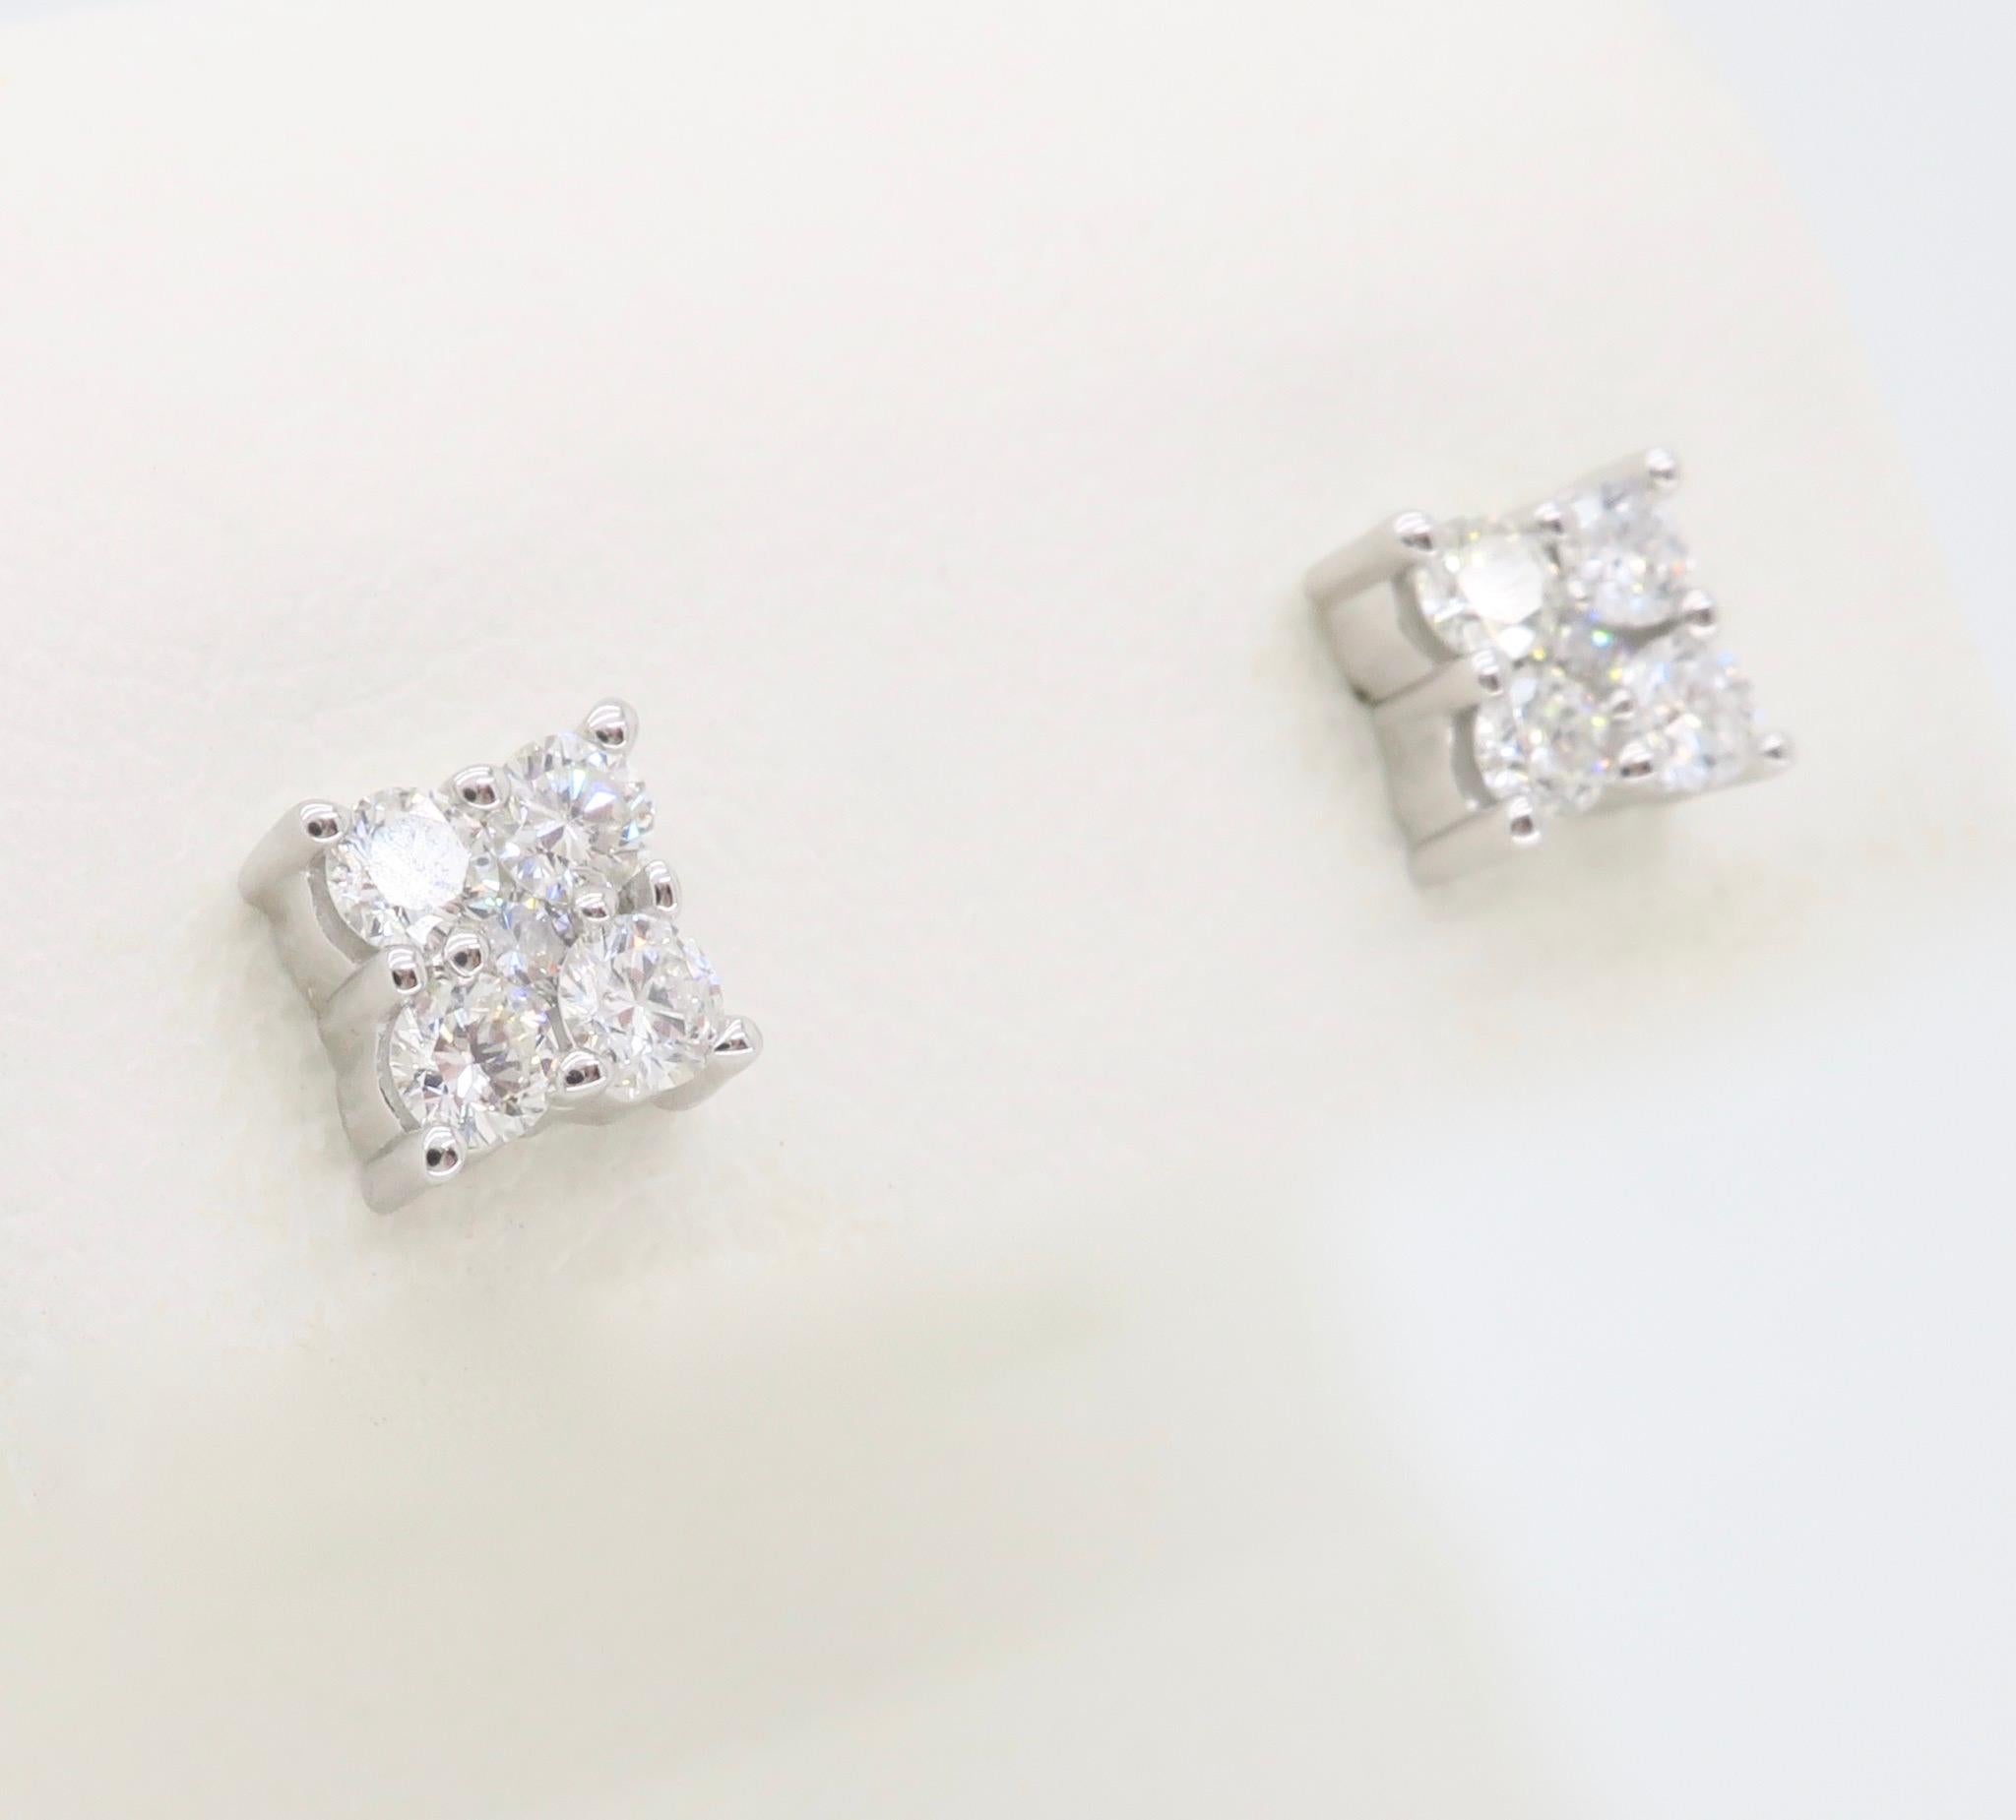 Cluster diamond stud earrings made in 14k white gold.

Total Diamond Carat Weight:  Approximately .55CTW
Diamond Cut: Round Brilliant Cut 
Color: F-H
Clarity: VS-SI 
Metal: 14K White Gold
Marked/Tested: Tested 14K, backs stamped “14k